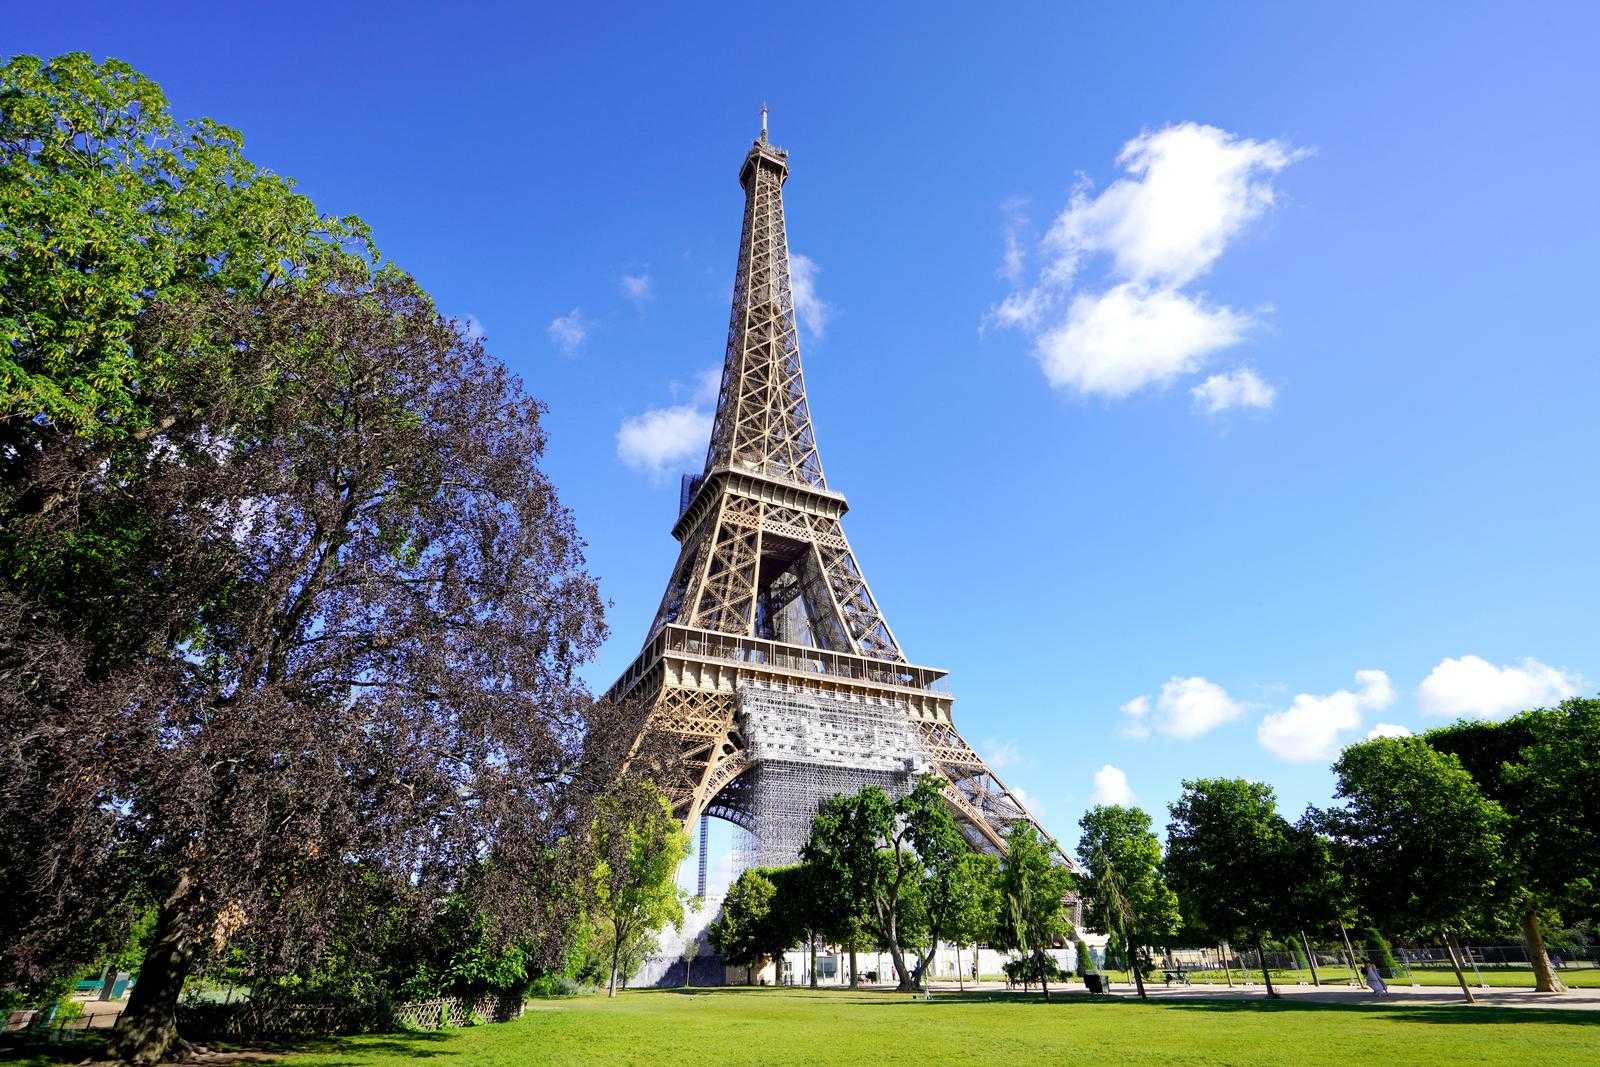 6 Easy Ways to Get Eiffel Tower Tickets Without the Long Lines